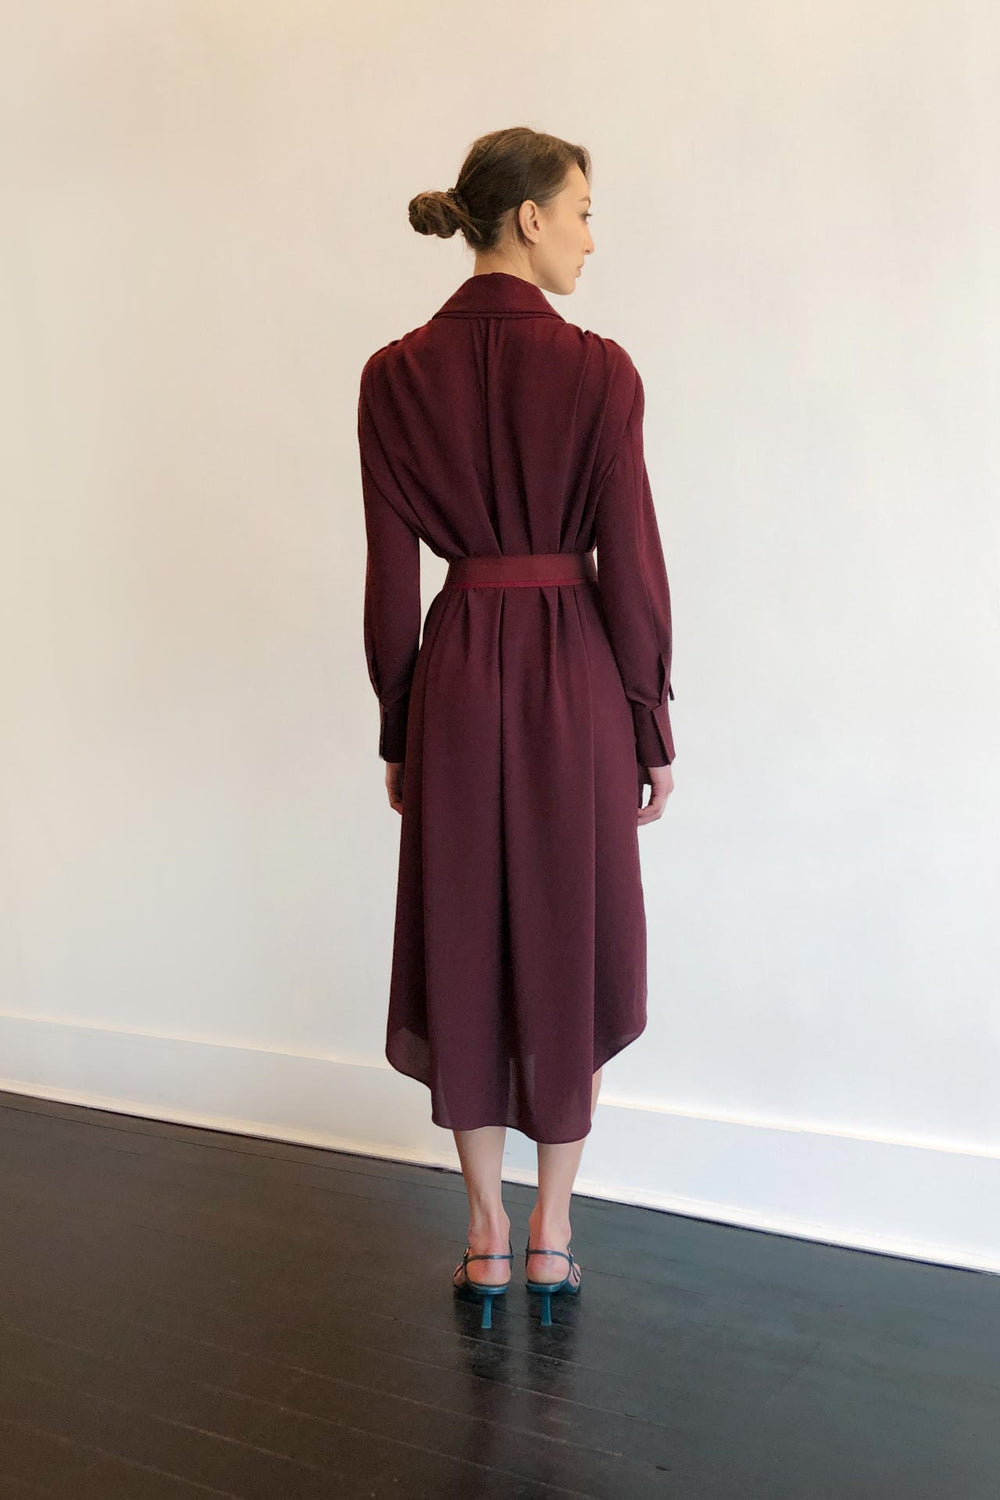 Fashion Designer CARL KAPP collection | Pheasant Onesize Fits All cocktail dress with sleeves Maroon | Sydney Australia